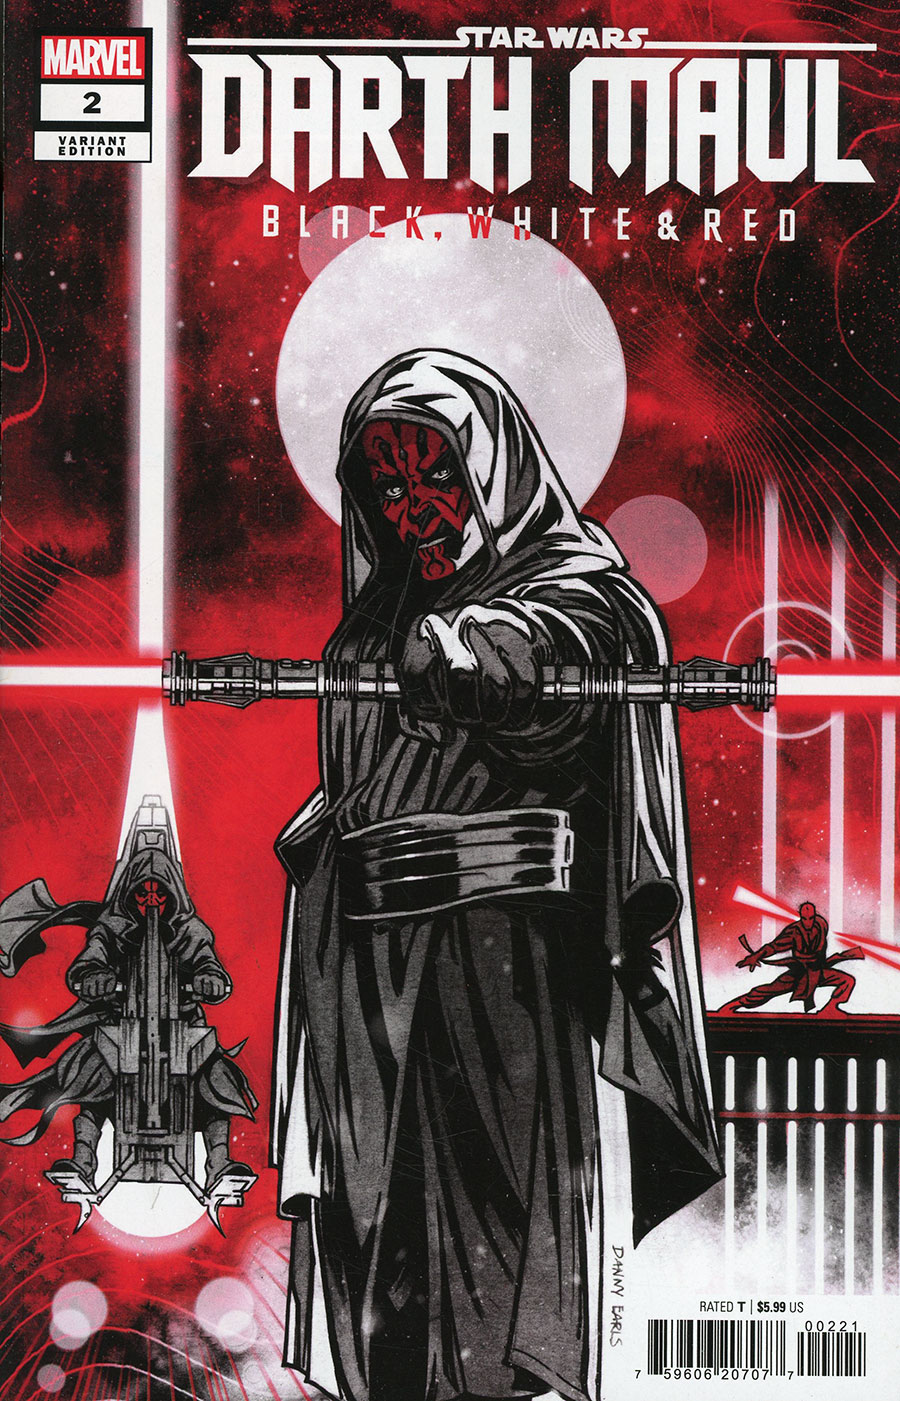 Star Wars Darth Maul Black White & Red #2 Cover B Variant Danny Earls Cover